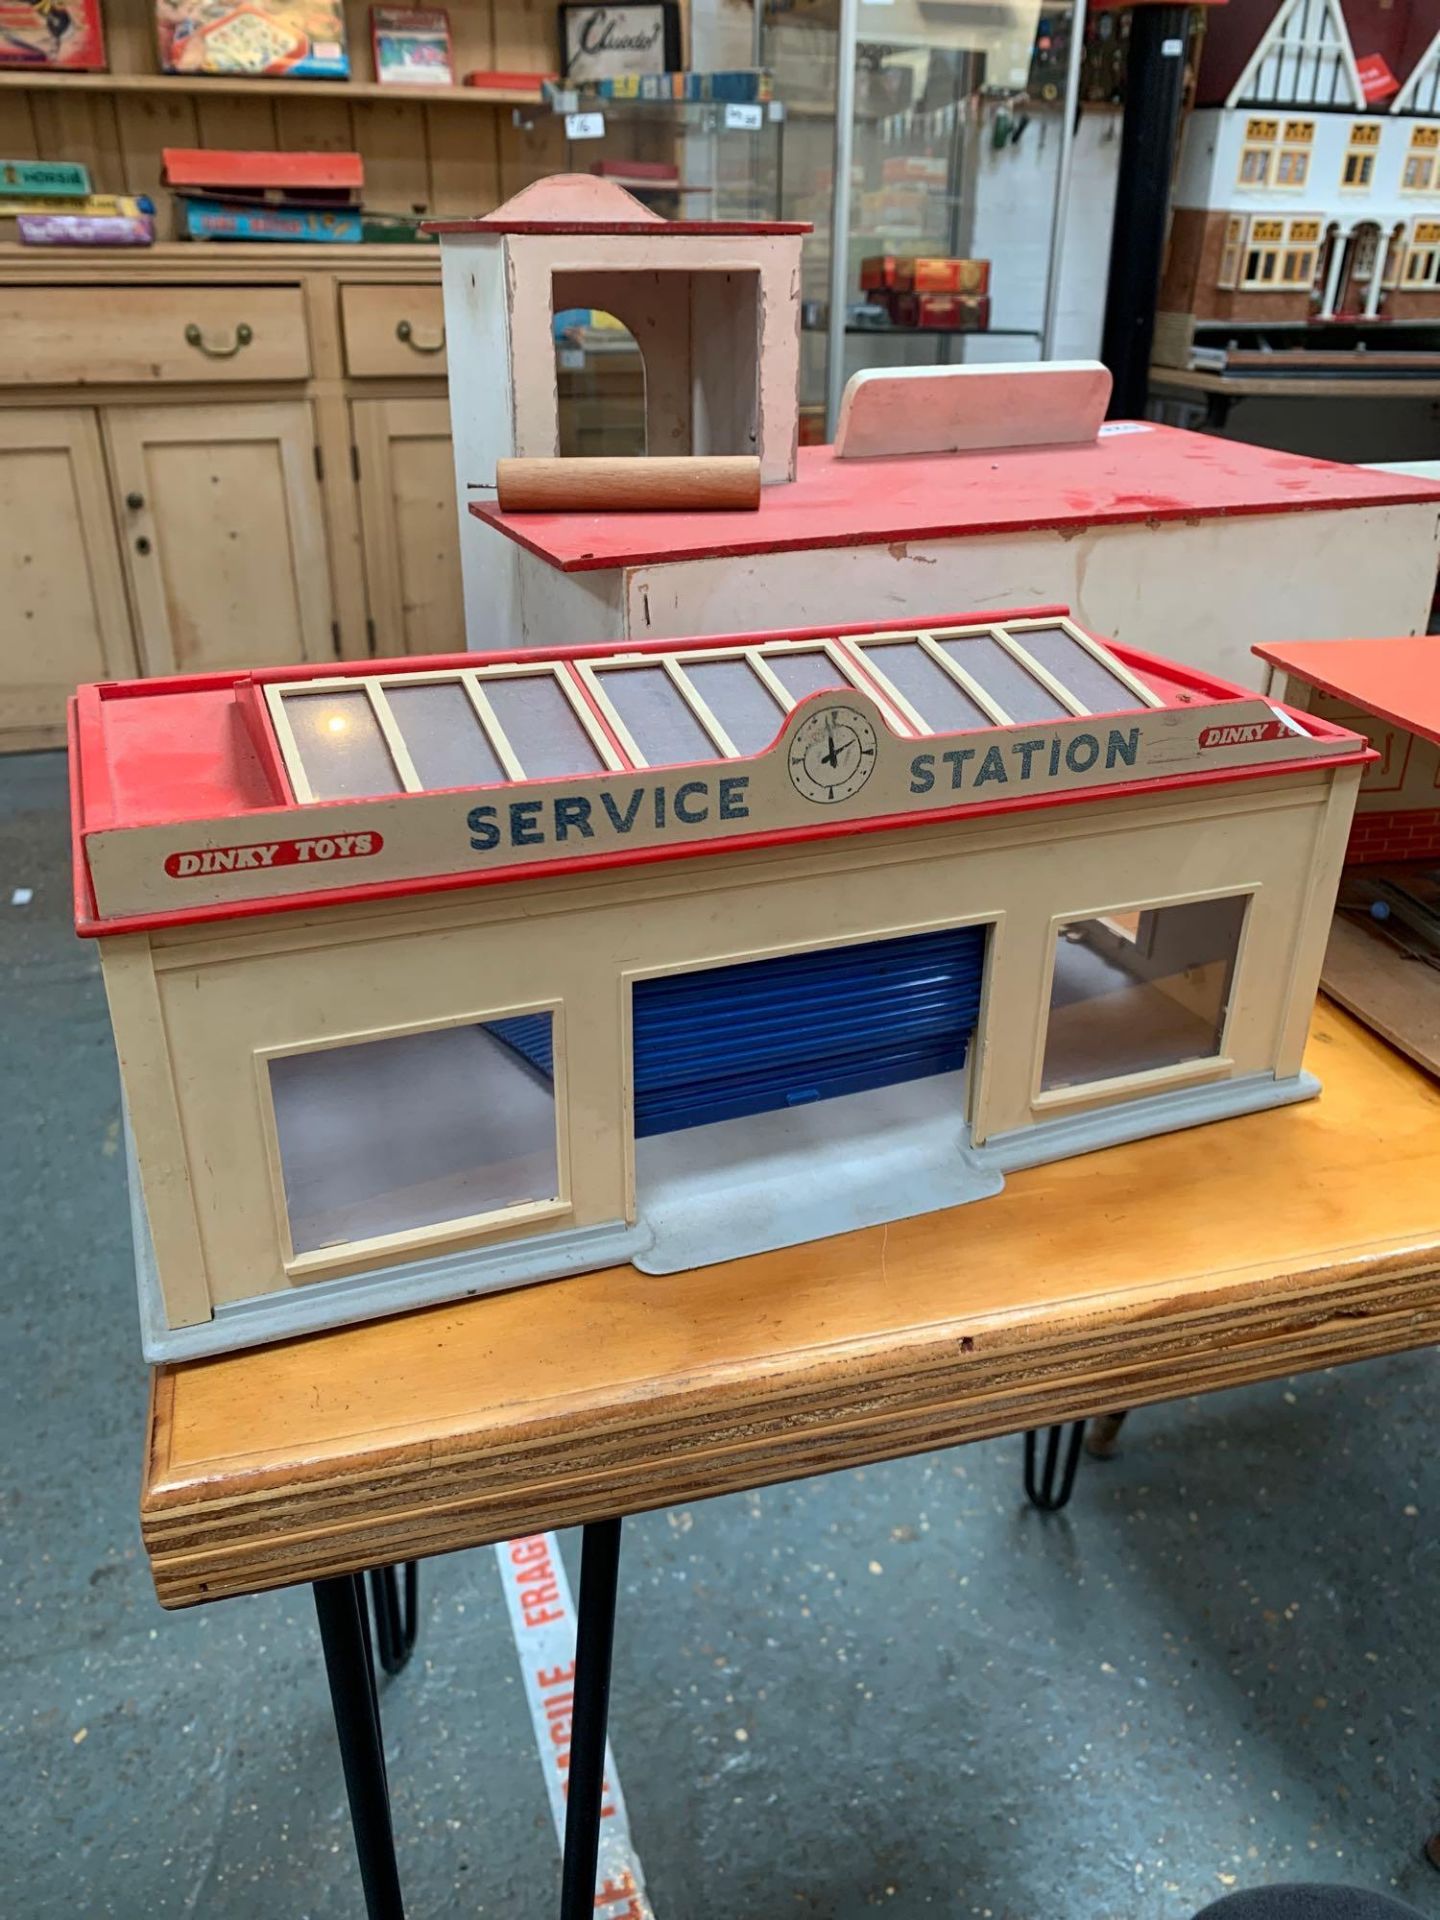 Dinky Toys Service Station Made From Plastic With Blue Roller Door One Of Two Doors Is Not Connected